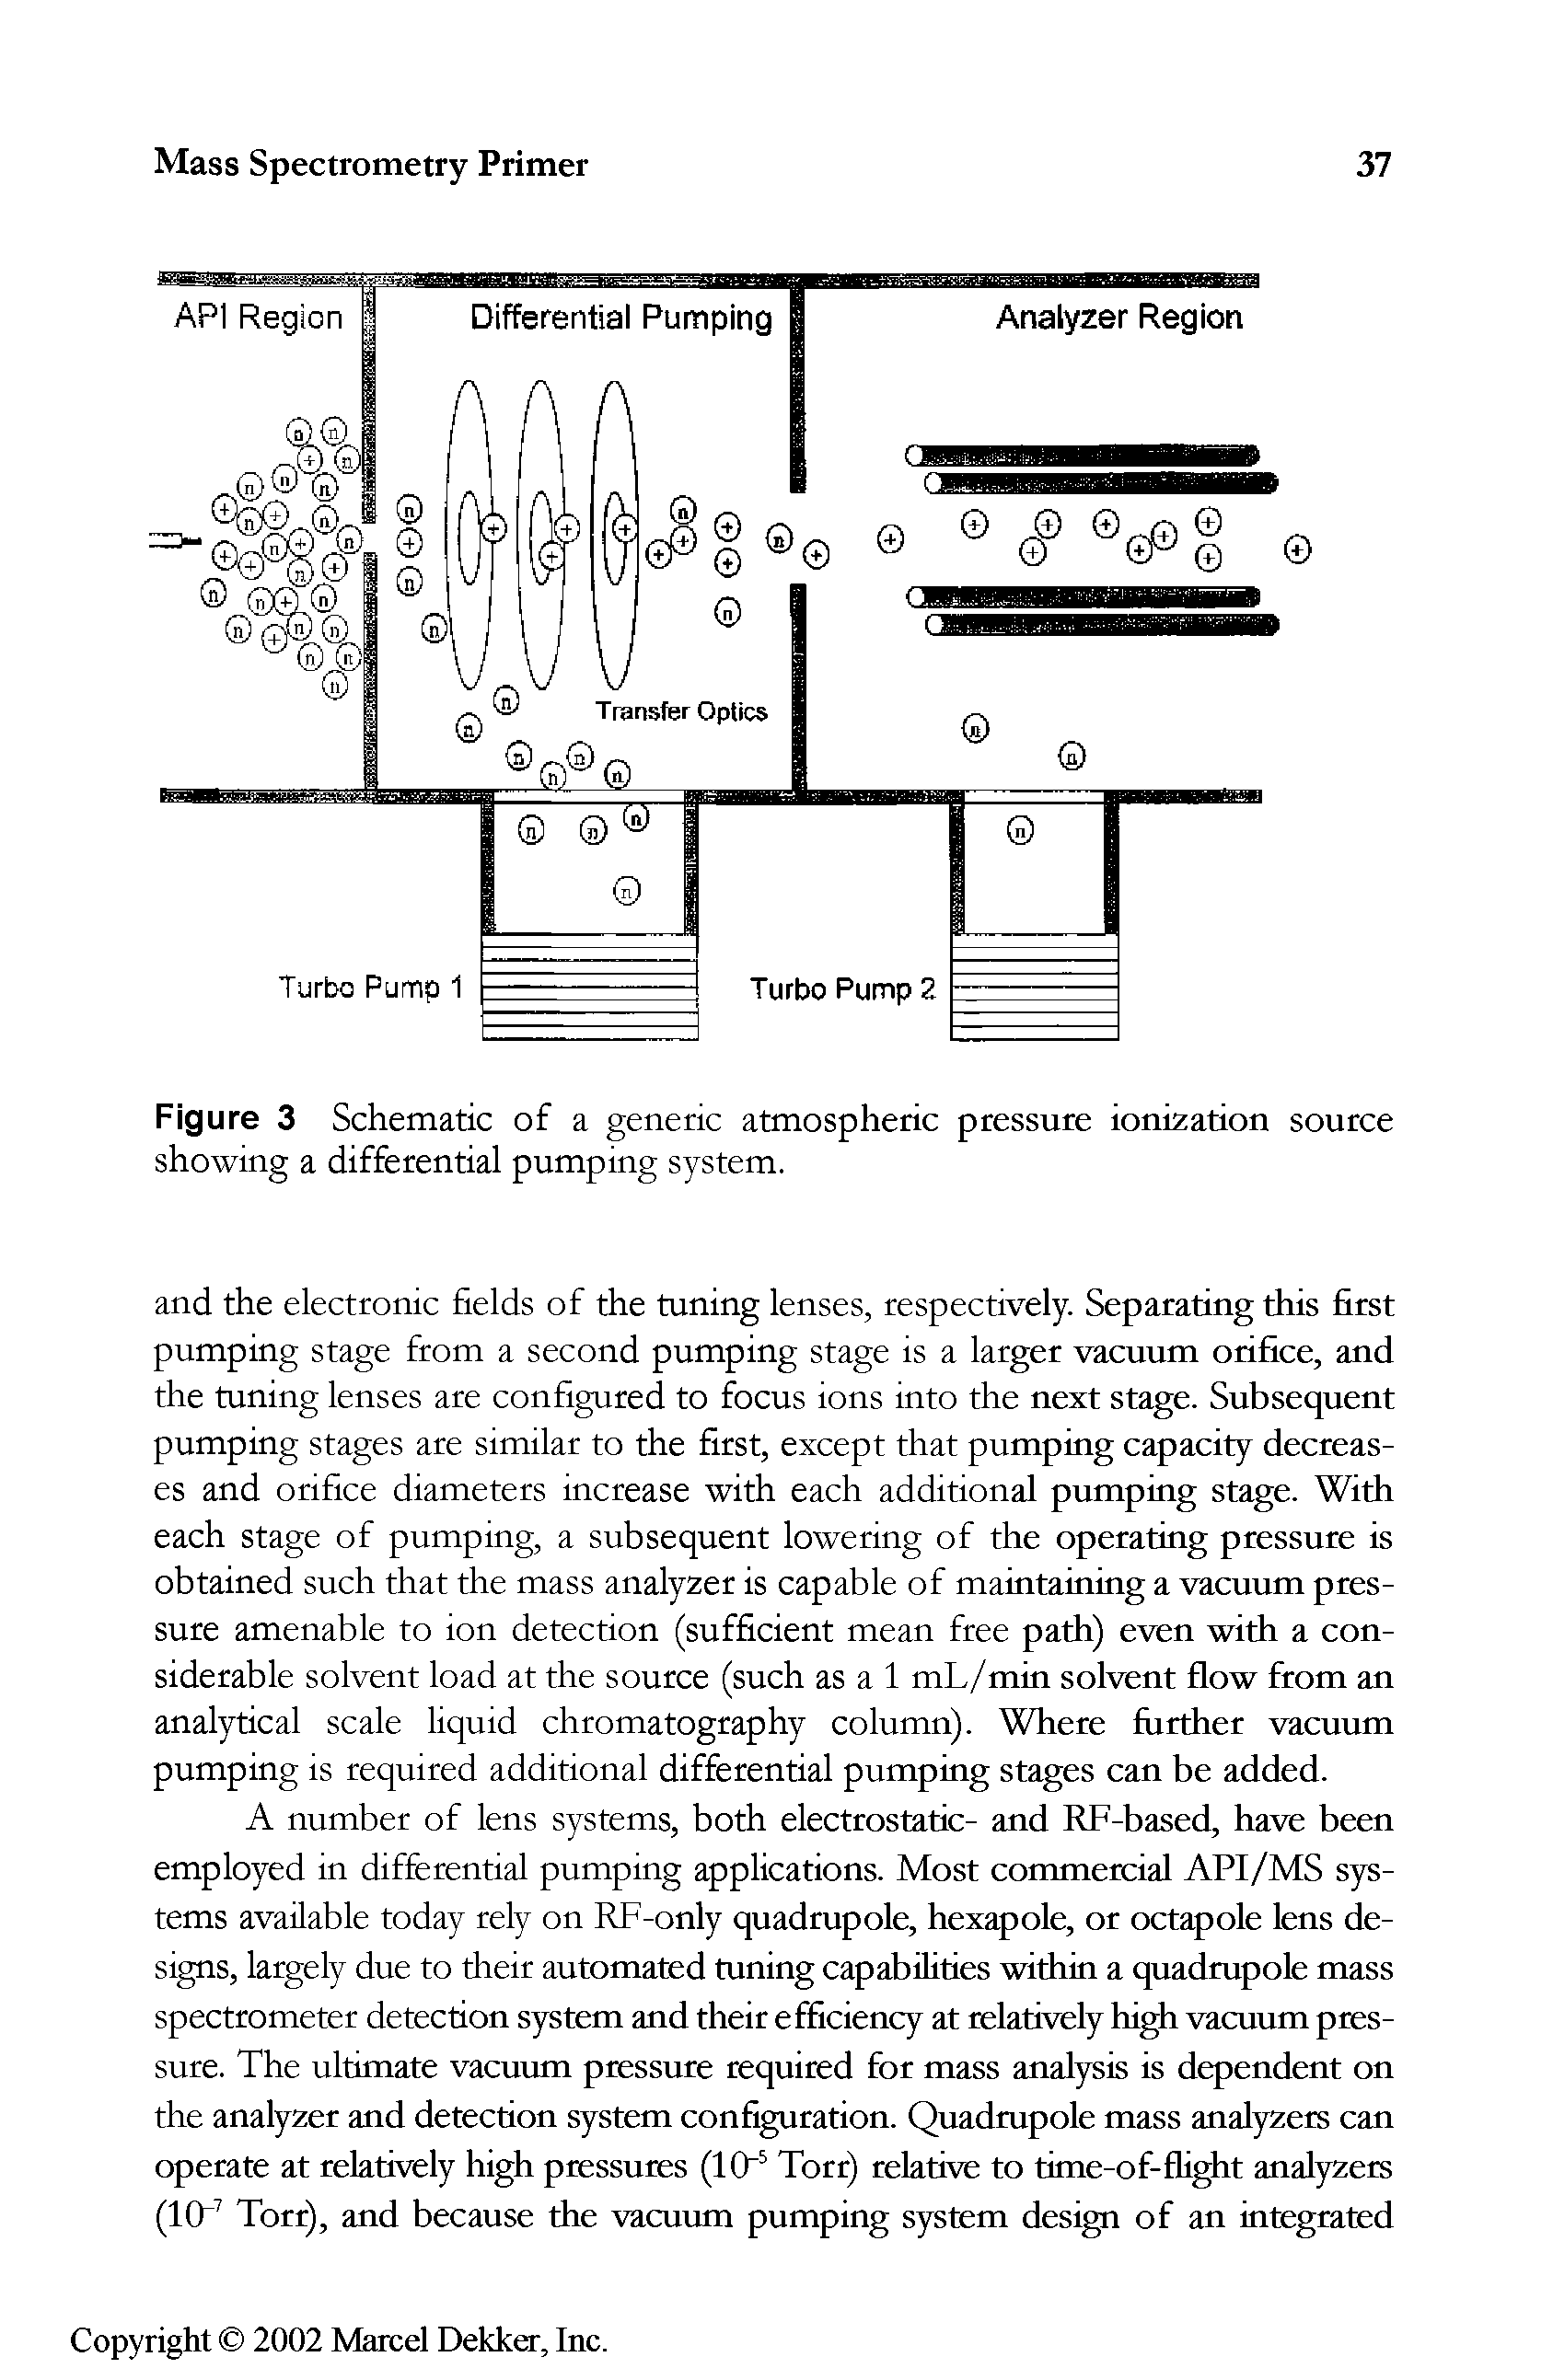 Figure 3 Schematic of a generic atmospheric pressure ionization source showing a differential pumping system.